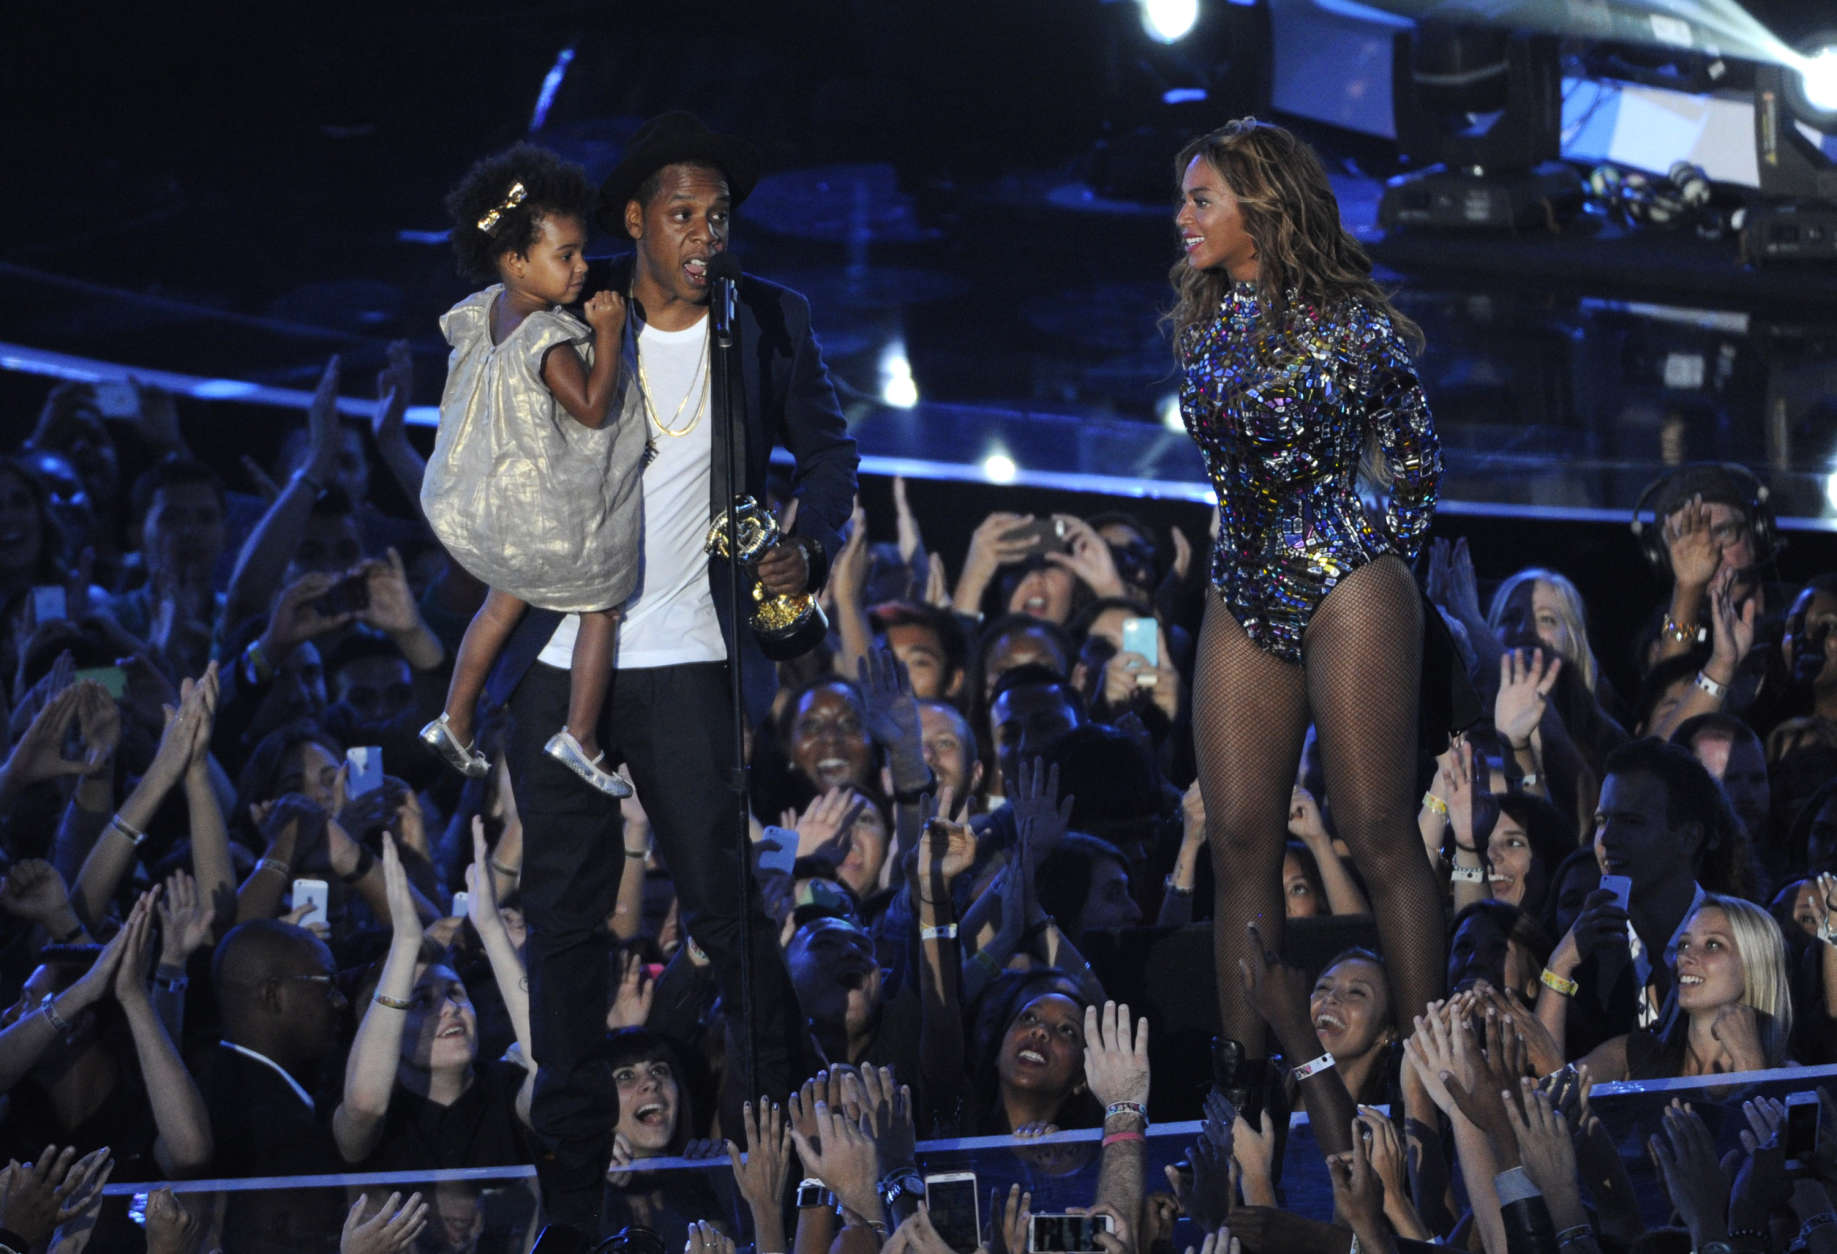 Beyonce on stage with Jay Z and their daughter Blue Ivy as she accepts the Video Vanguard Award at the MTV Video Music Awards at The Forum on Sunday, Aug. 24, 2014, in Inglewood, Calif. (Photo by Chris Pizzello/Invision/AP)